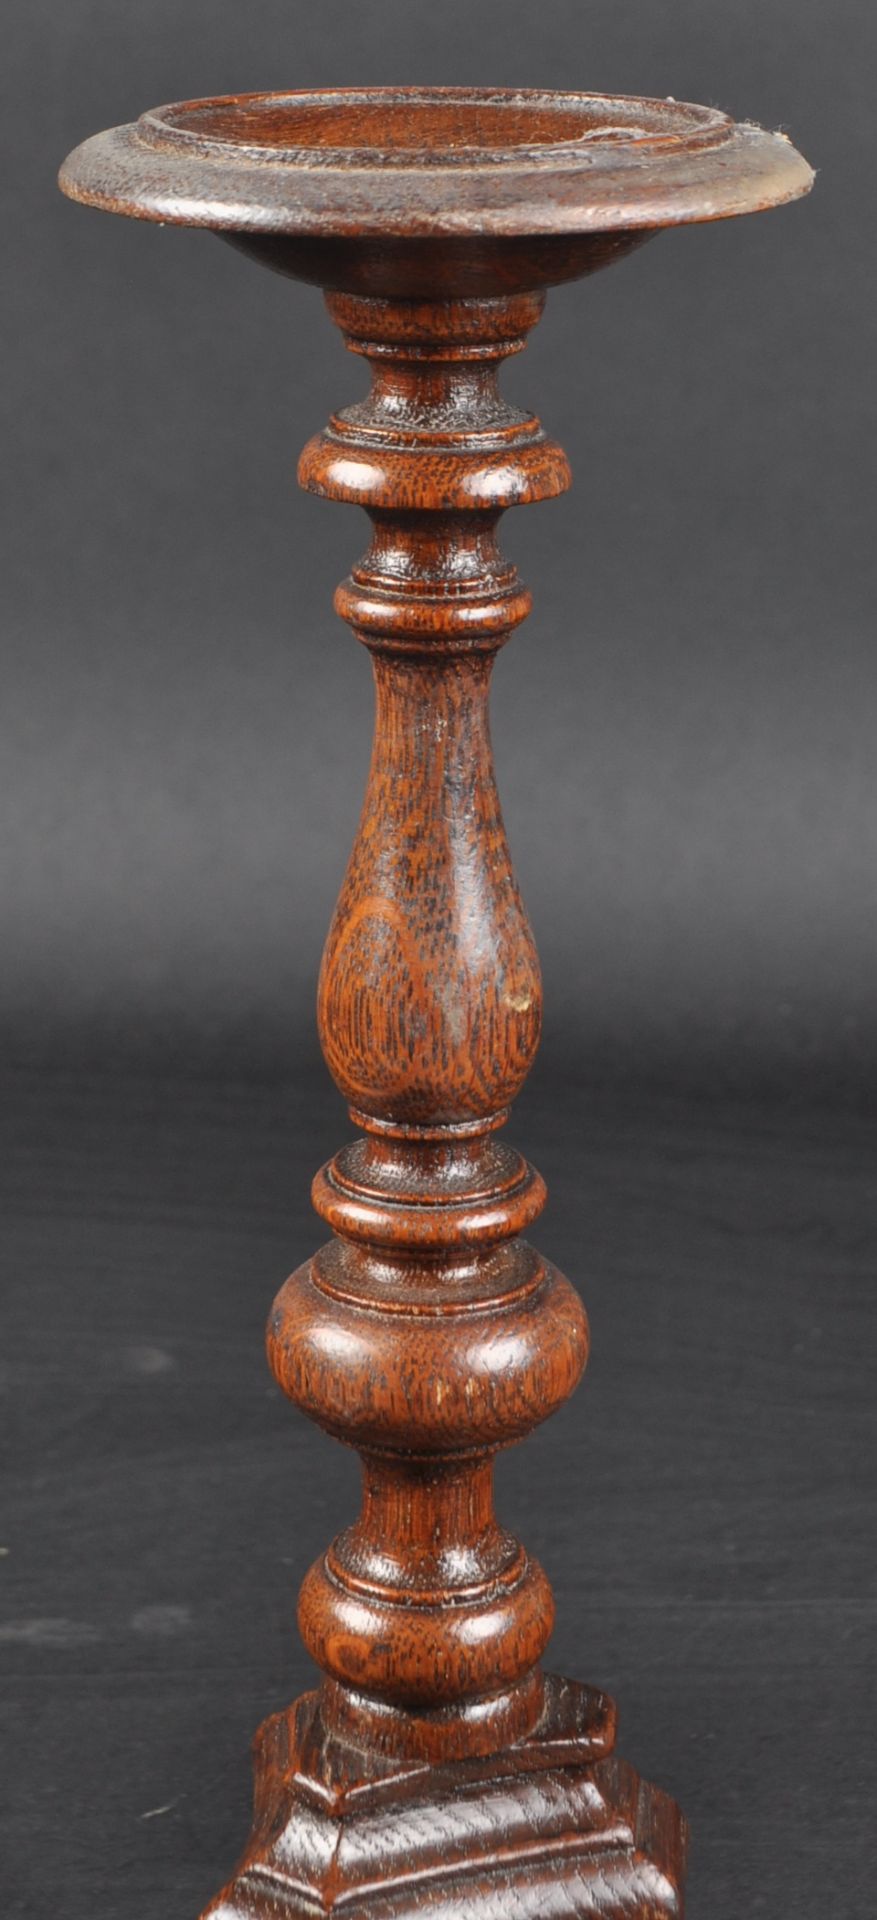 19TH CENTURY TURNED OAK ALTAR CANDLESTICK - Image 3 of 4